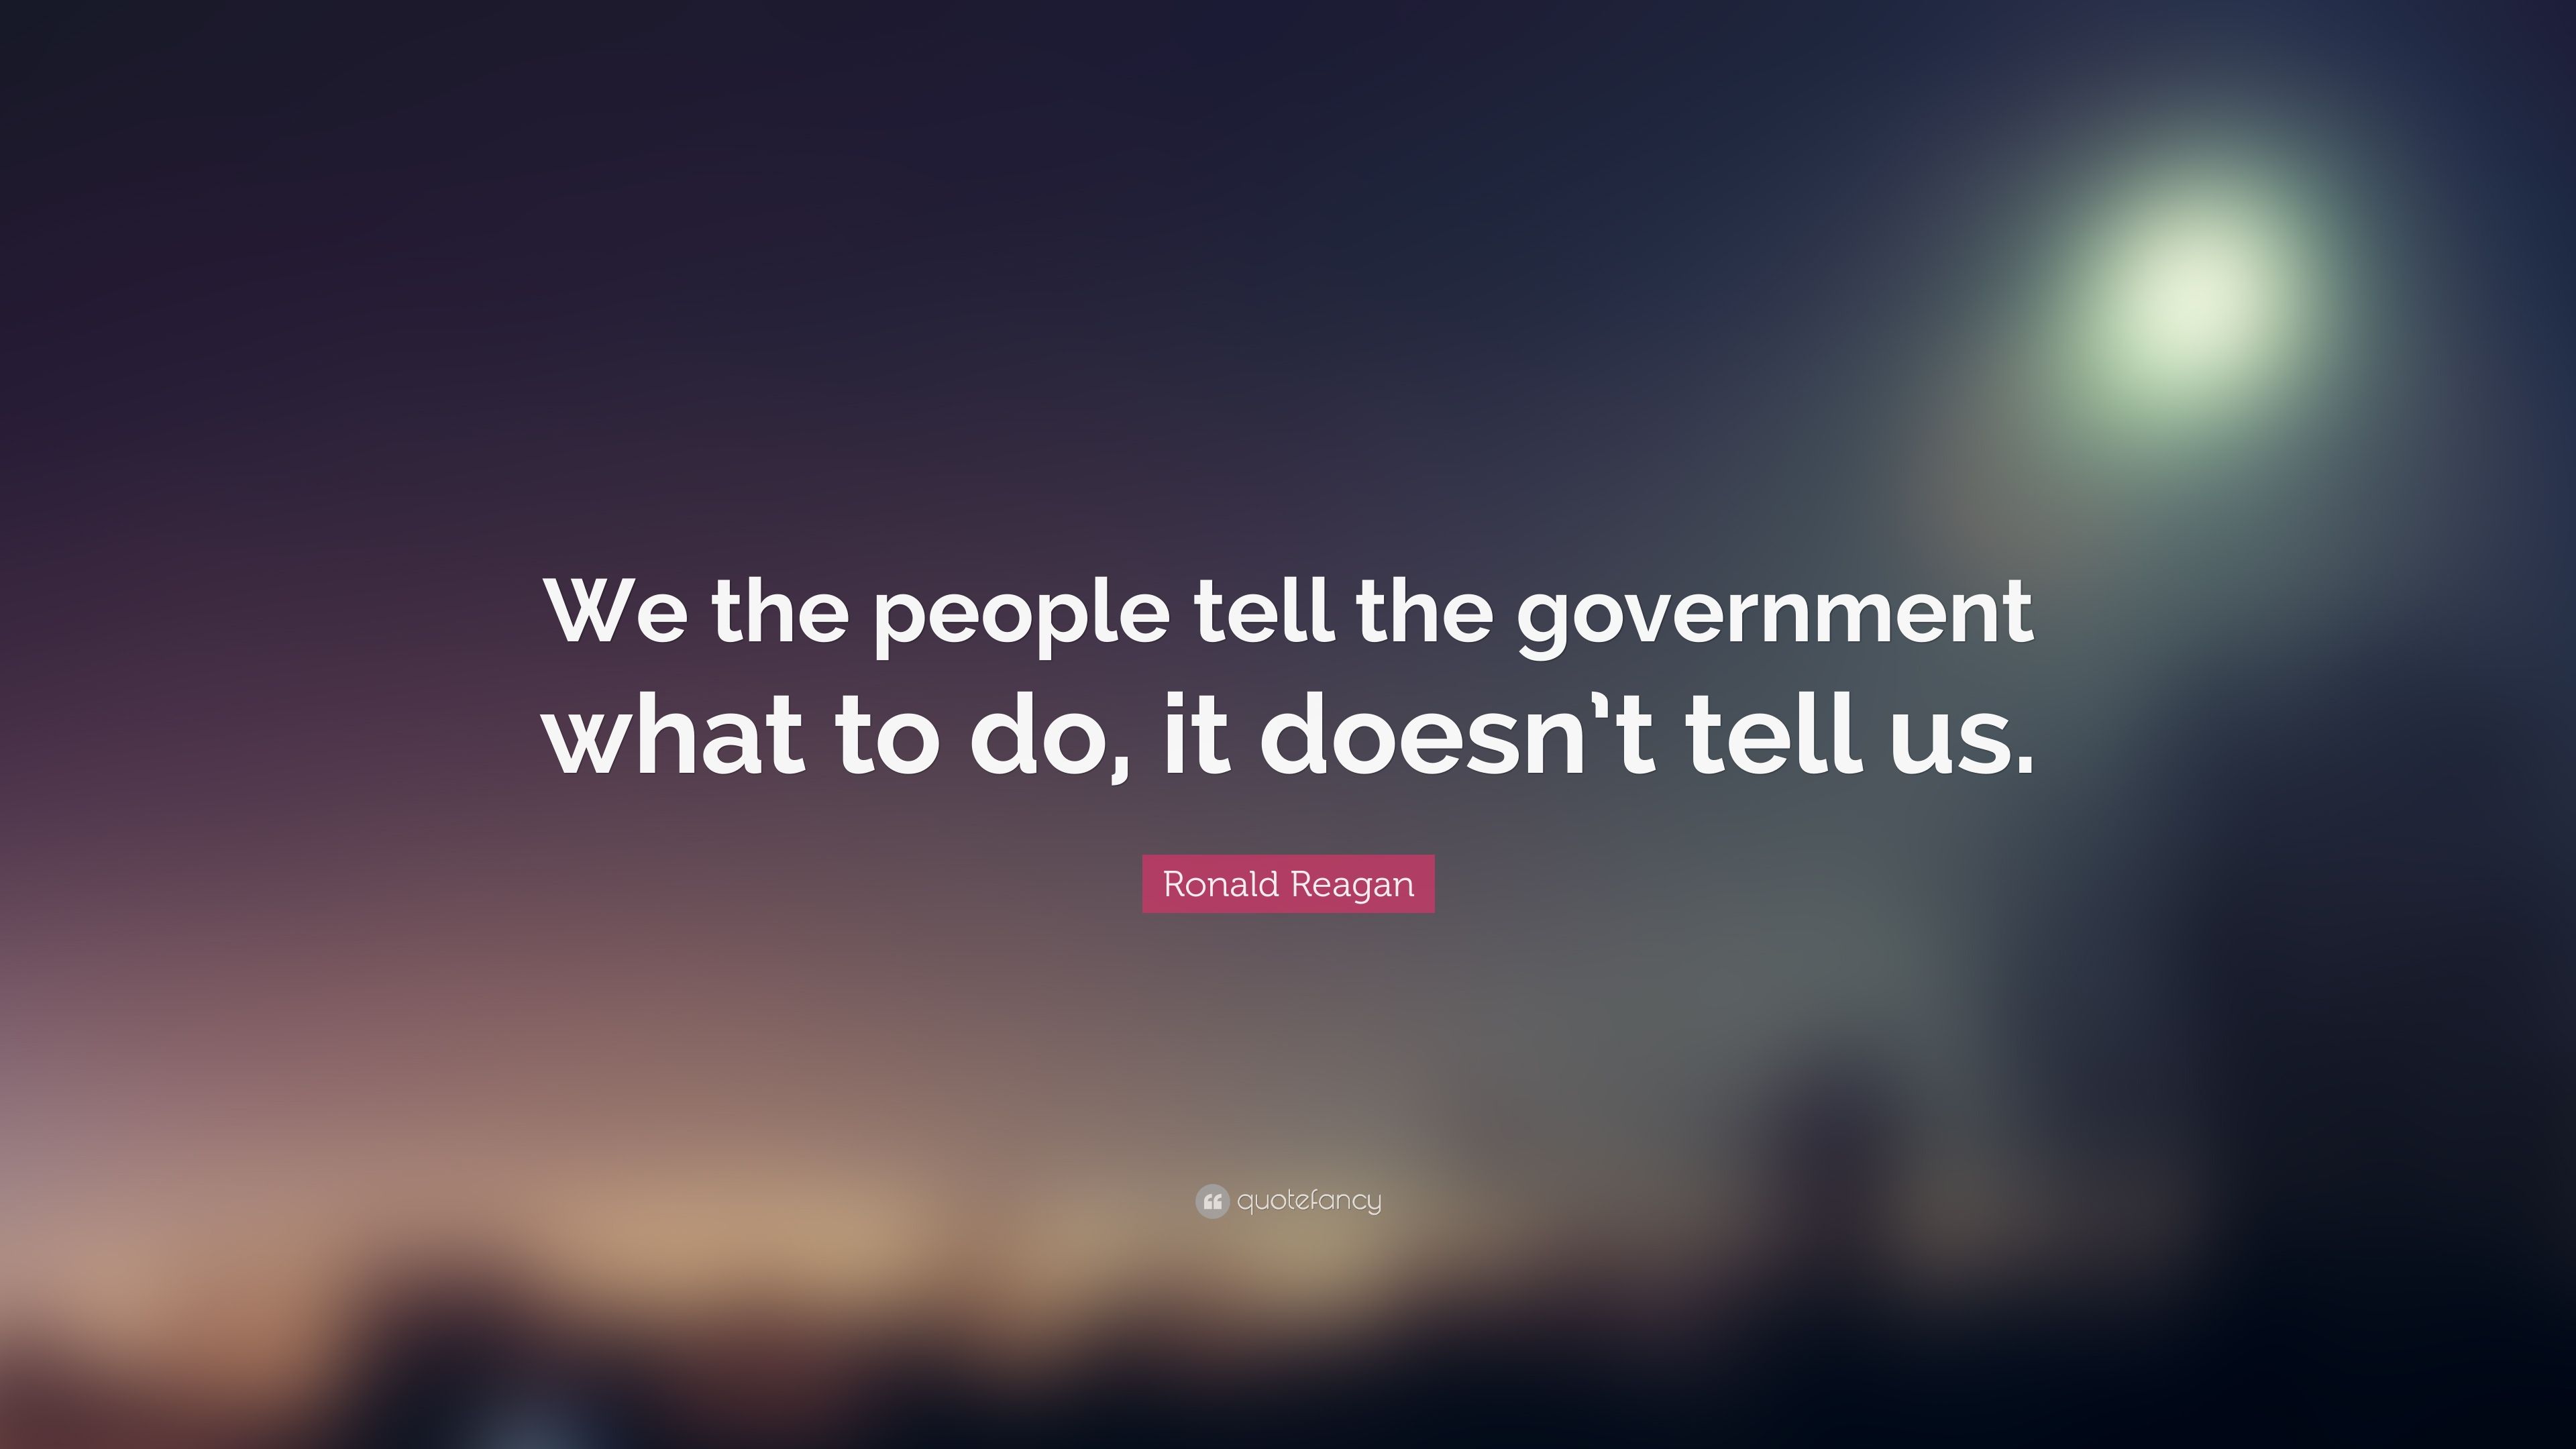 Ronald Reagan Quote: “We the people tell the government what to do